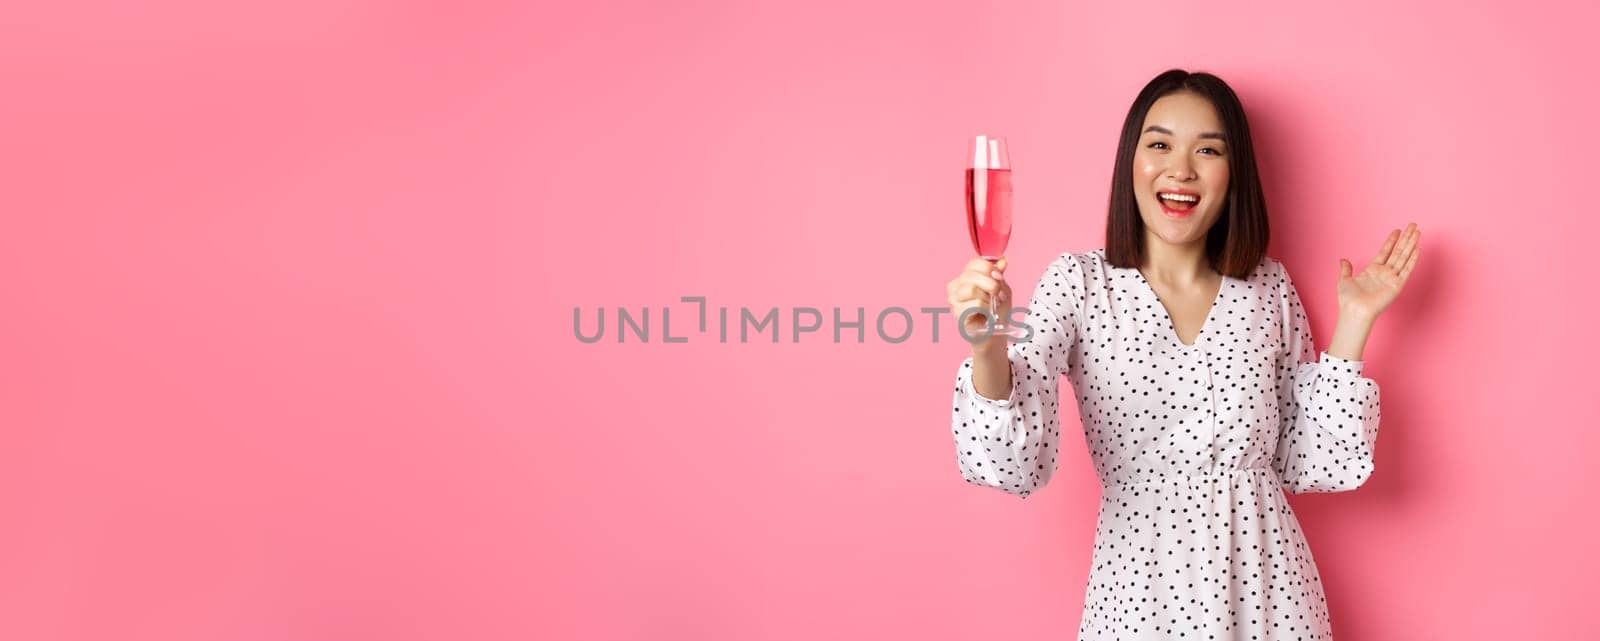 Happy asian woman celebrating, saying toast on party, raising glass of champagne and smiling, standing in dress over pink background.